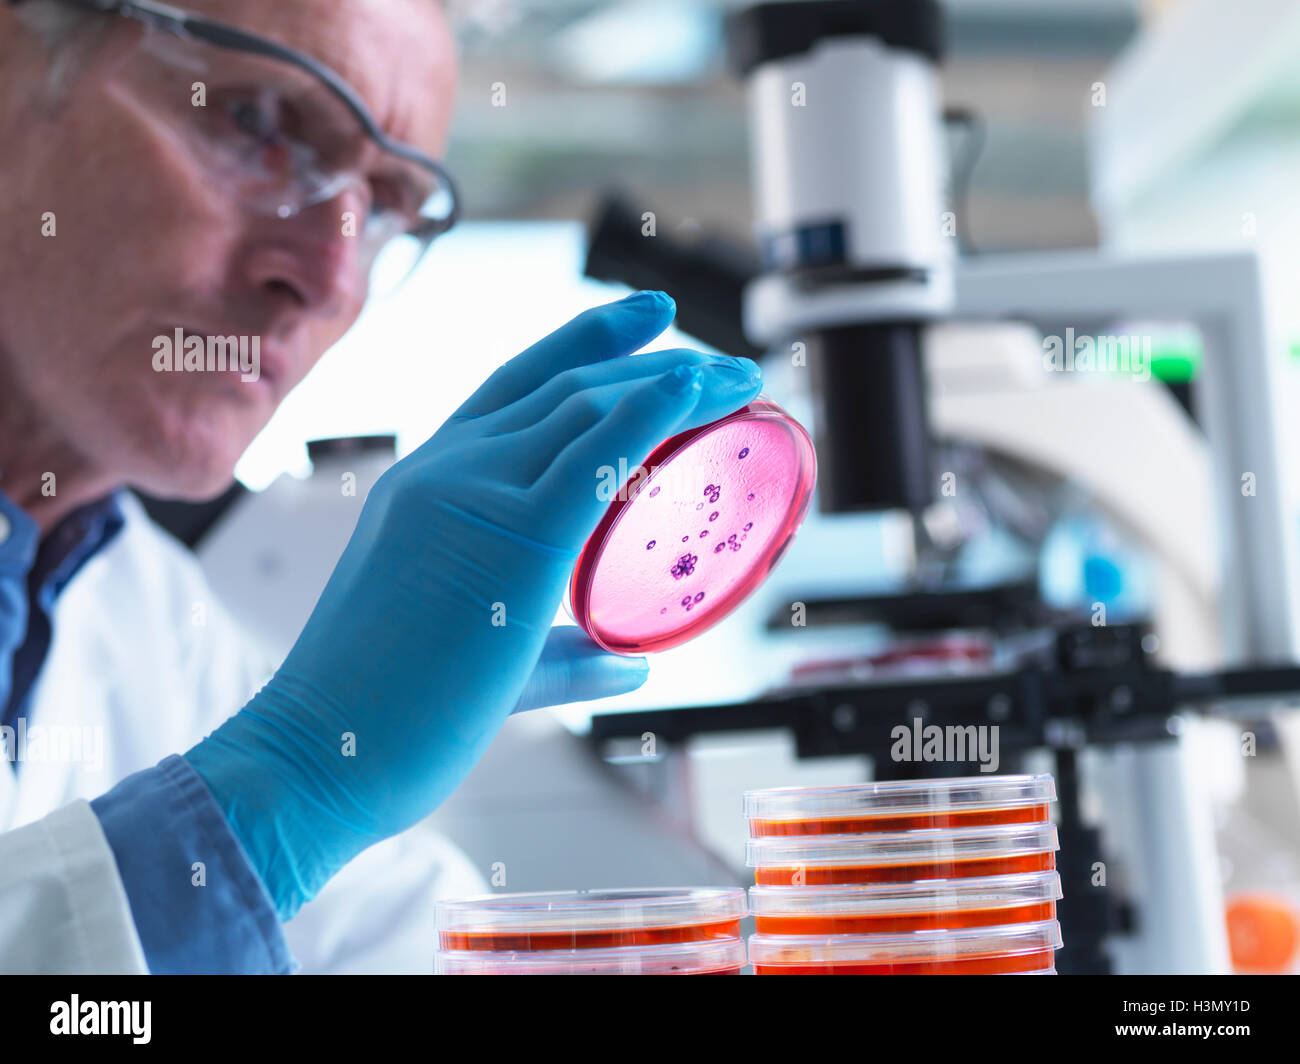 Microbiology, Scientist using an inverted light microscope to view culture growth in petri dishes during an experiment Stock Photo